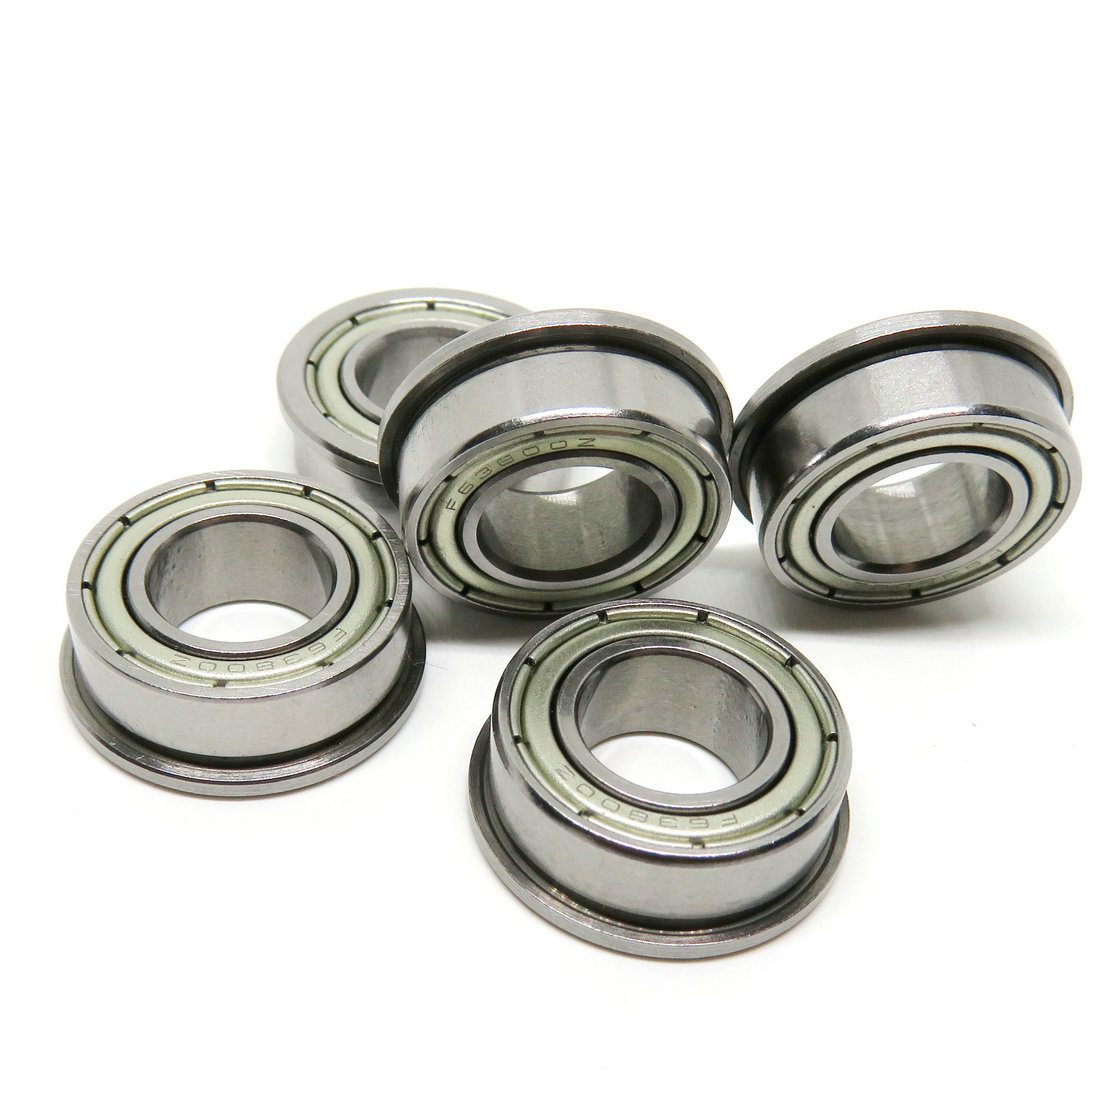 F6200 ZZ 10x30x9mm flange ball bearing F6200ZZ F6201 F6202 F6203 F6204 F6205 F6206 F6207Z for textile machinery bearing